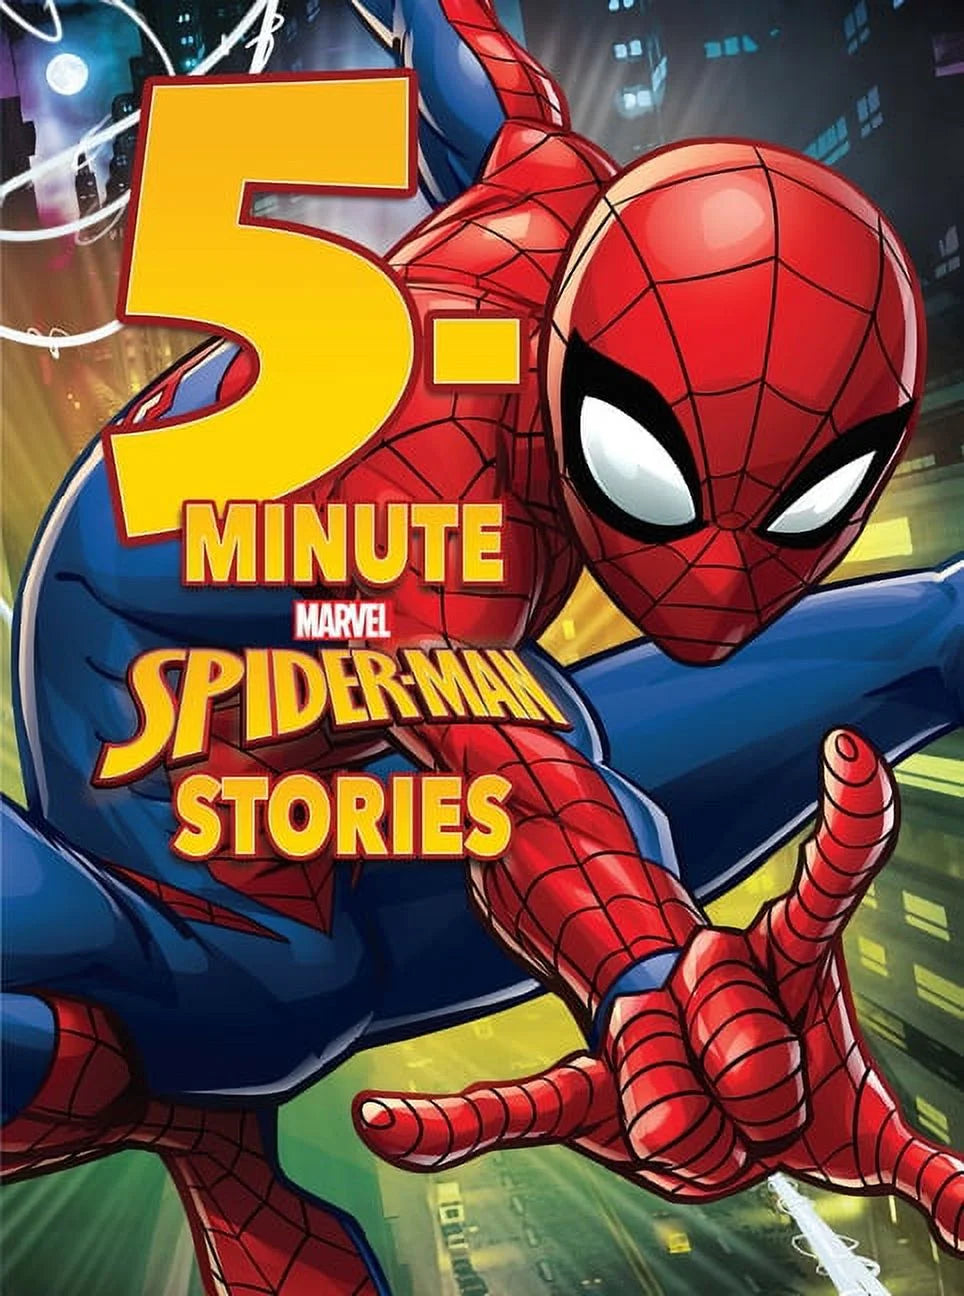 5-Minute Spider-Man Stories (Hardcover)